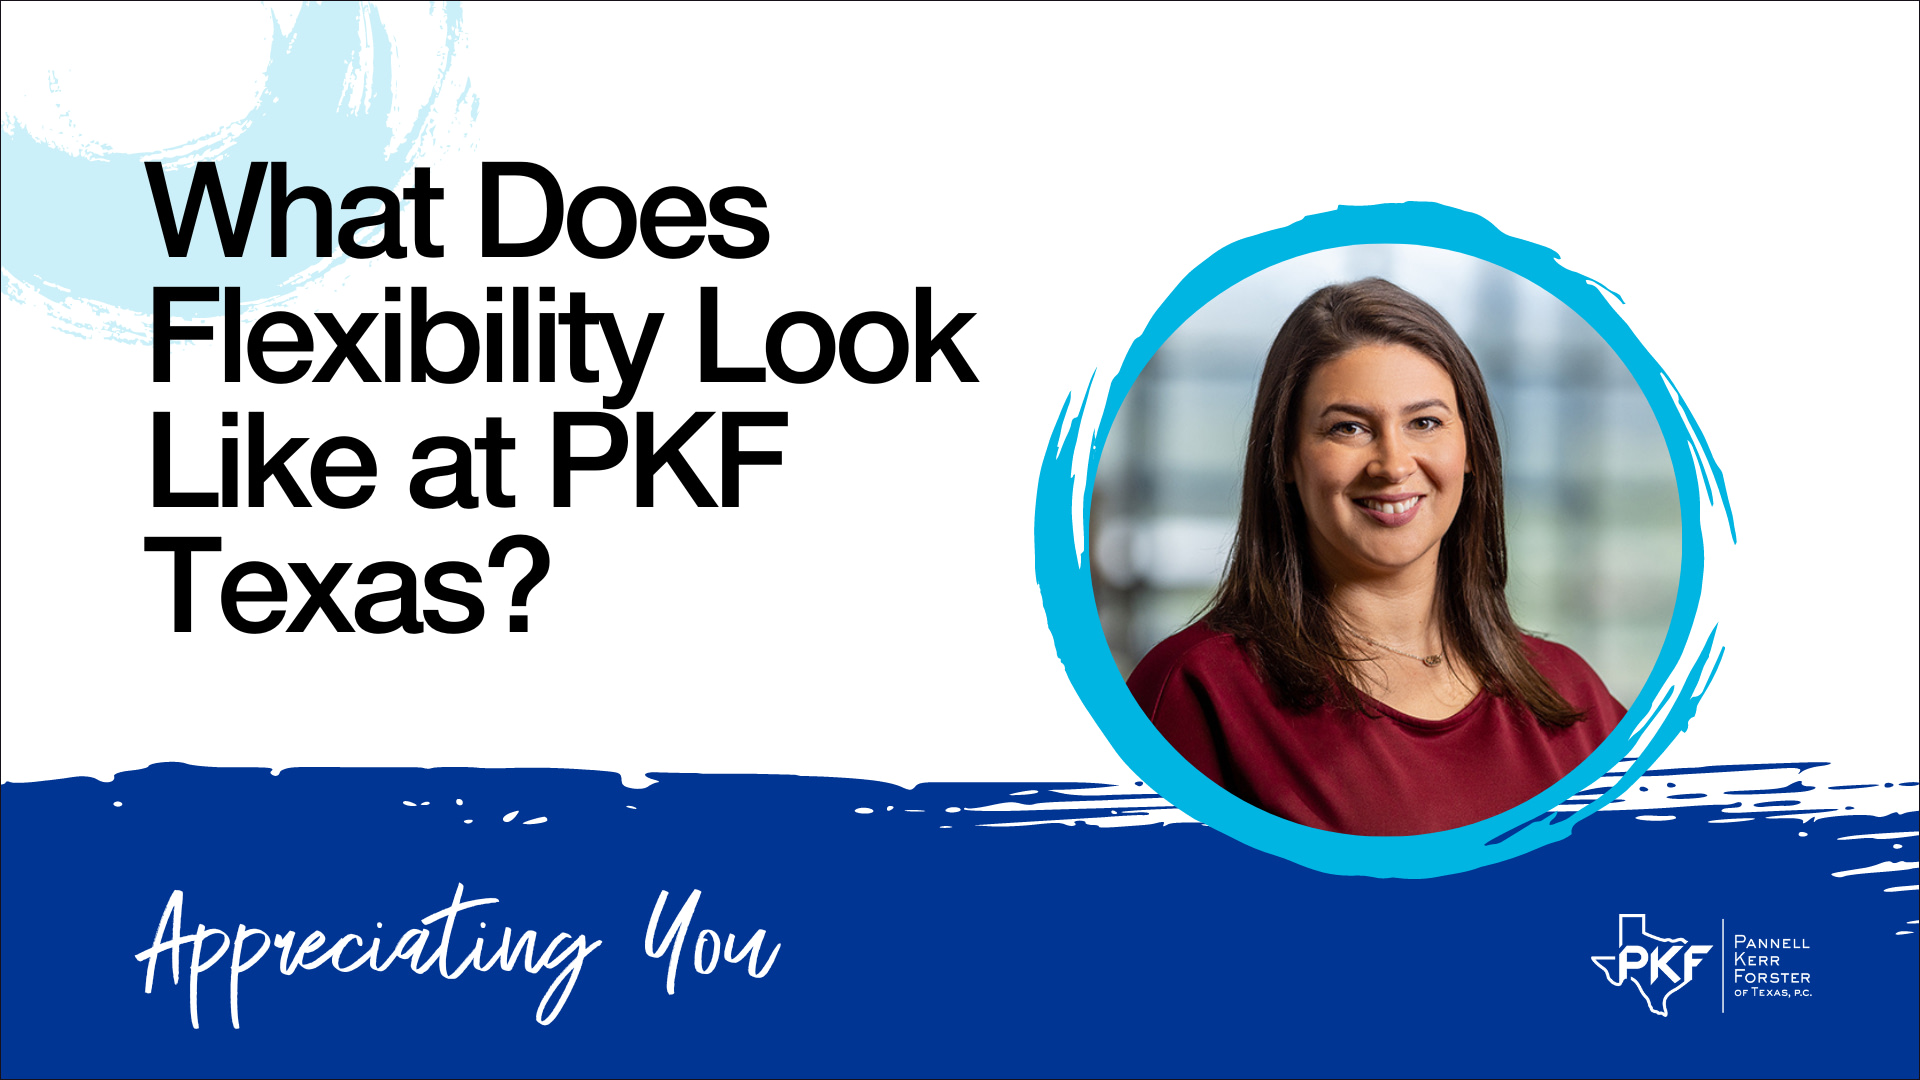 A video thumbnail graphic for PKF Texas recruiting, "What Does Flexibility Look Like at PKF Texas?"